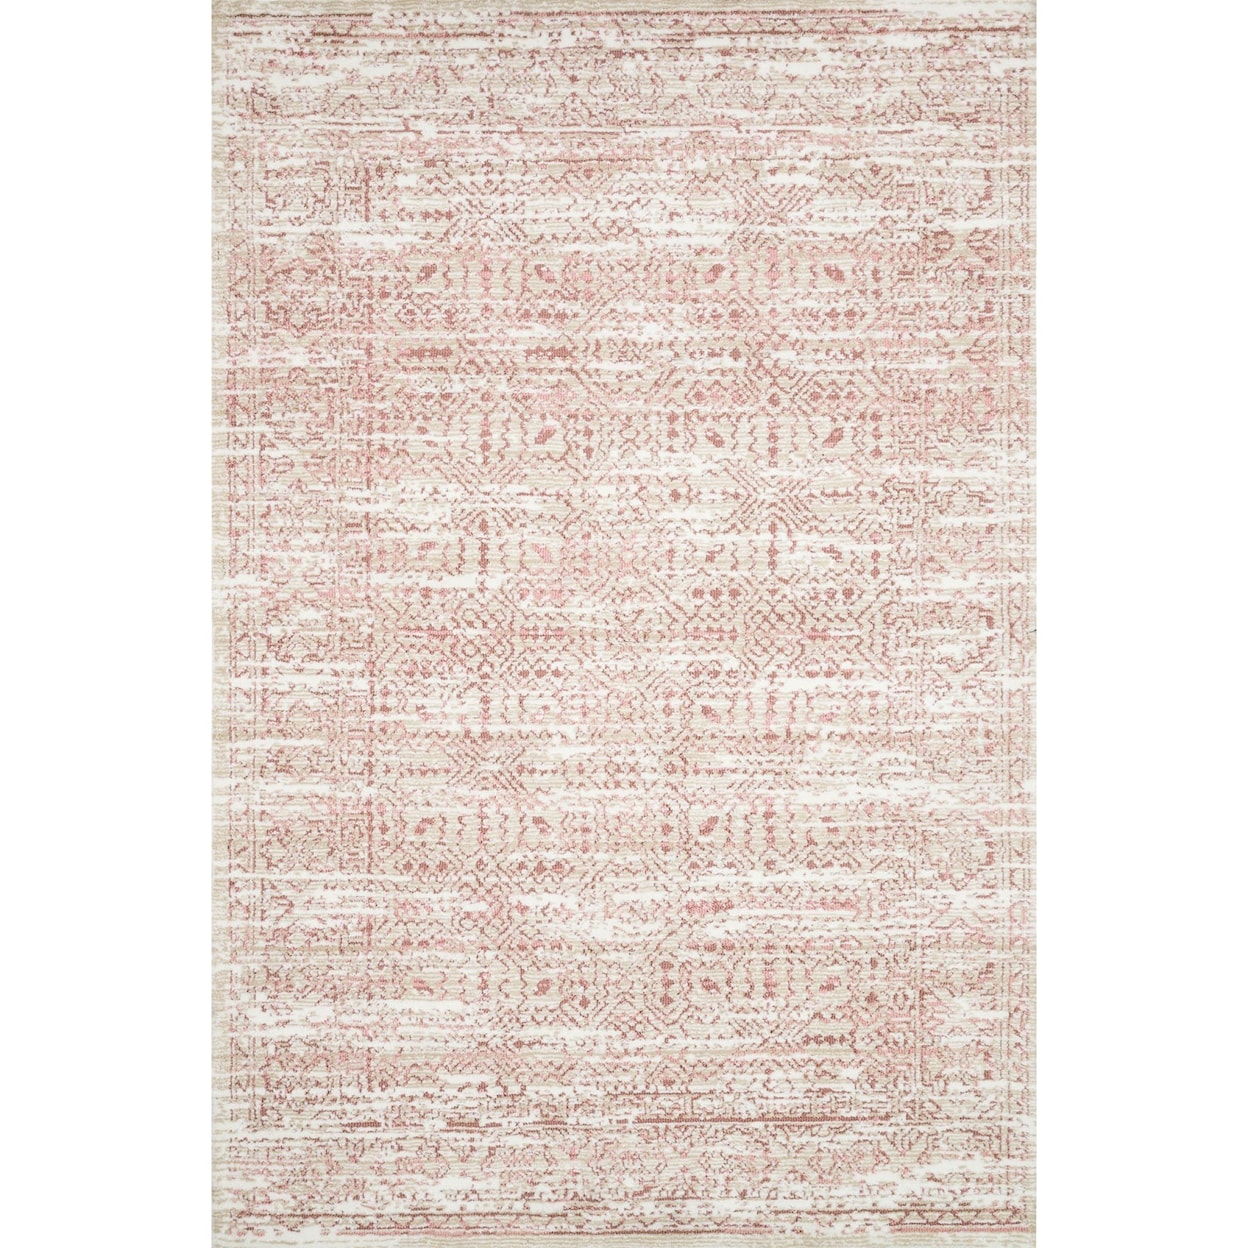 Magnolia Home by Joanna Gaines for Loloi Lotus 2'-3" x 3'-9" Rug